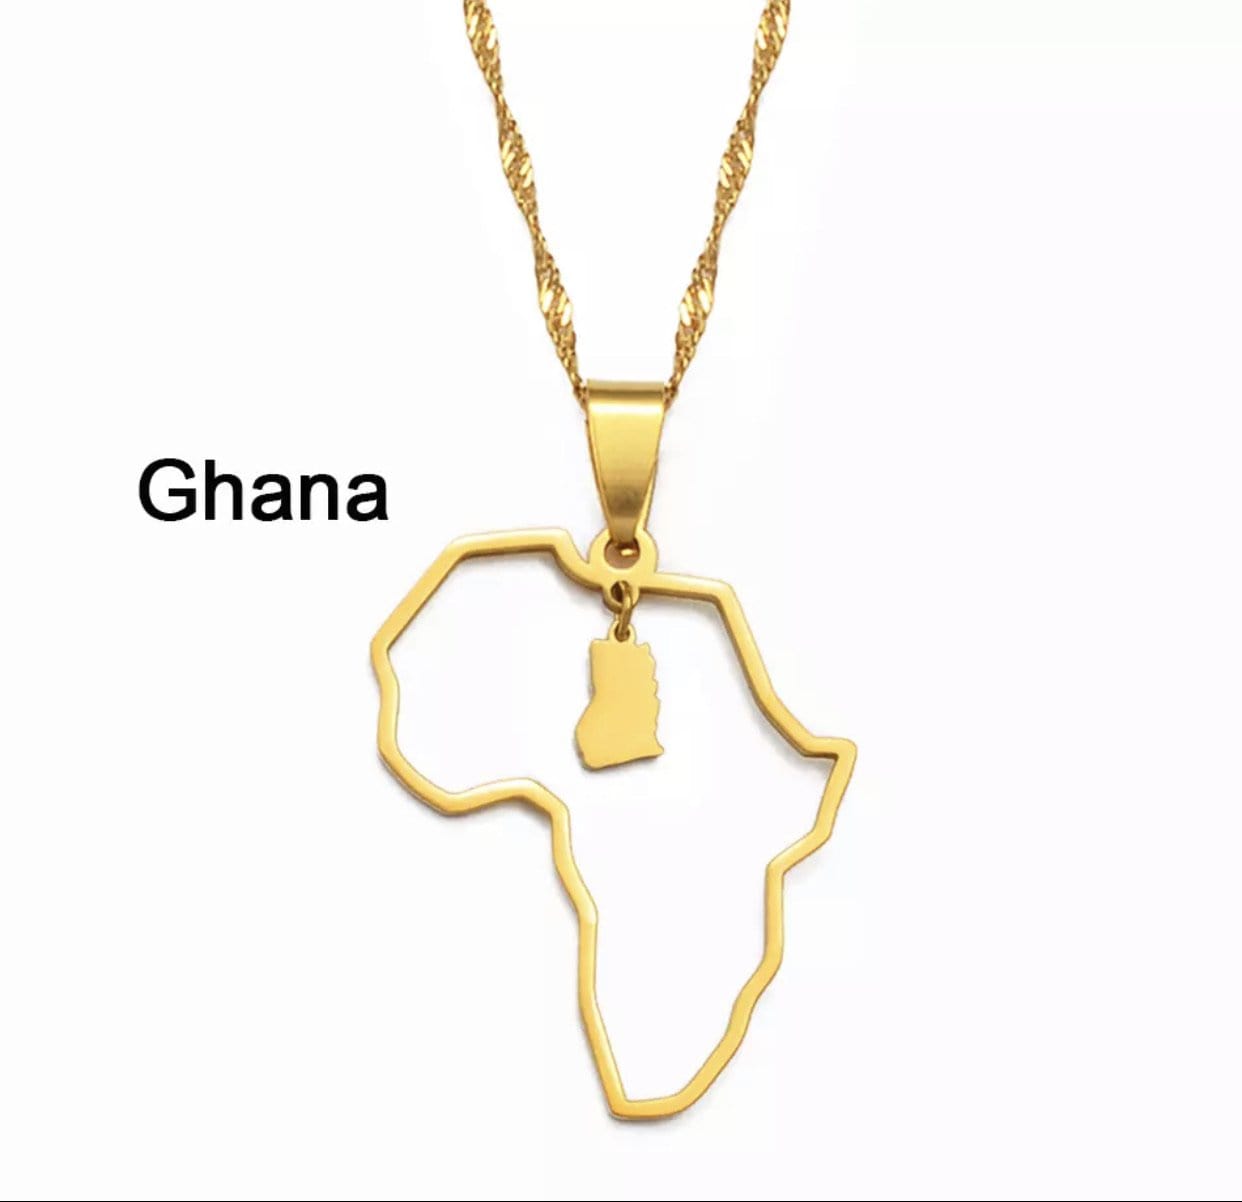 Veryldesigns Necklace Ghana Custom African country Necklace